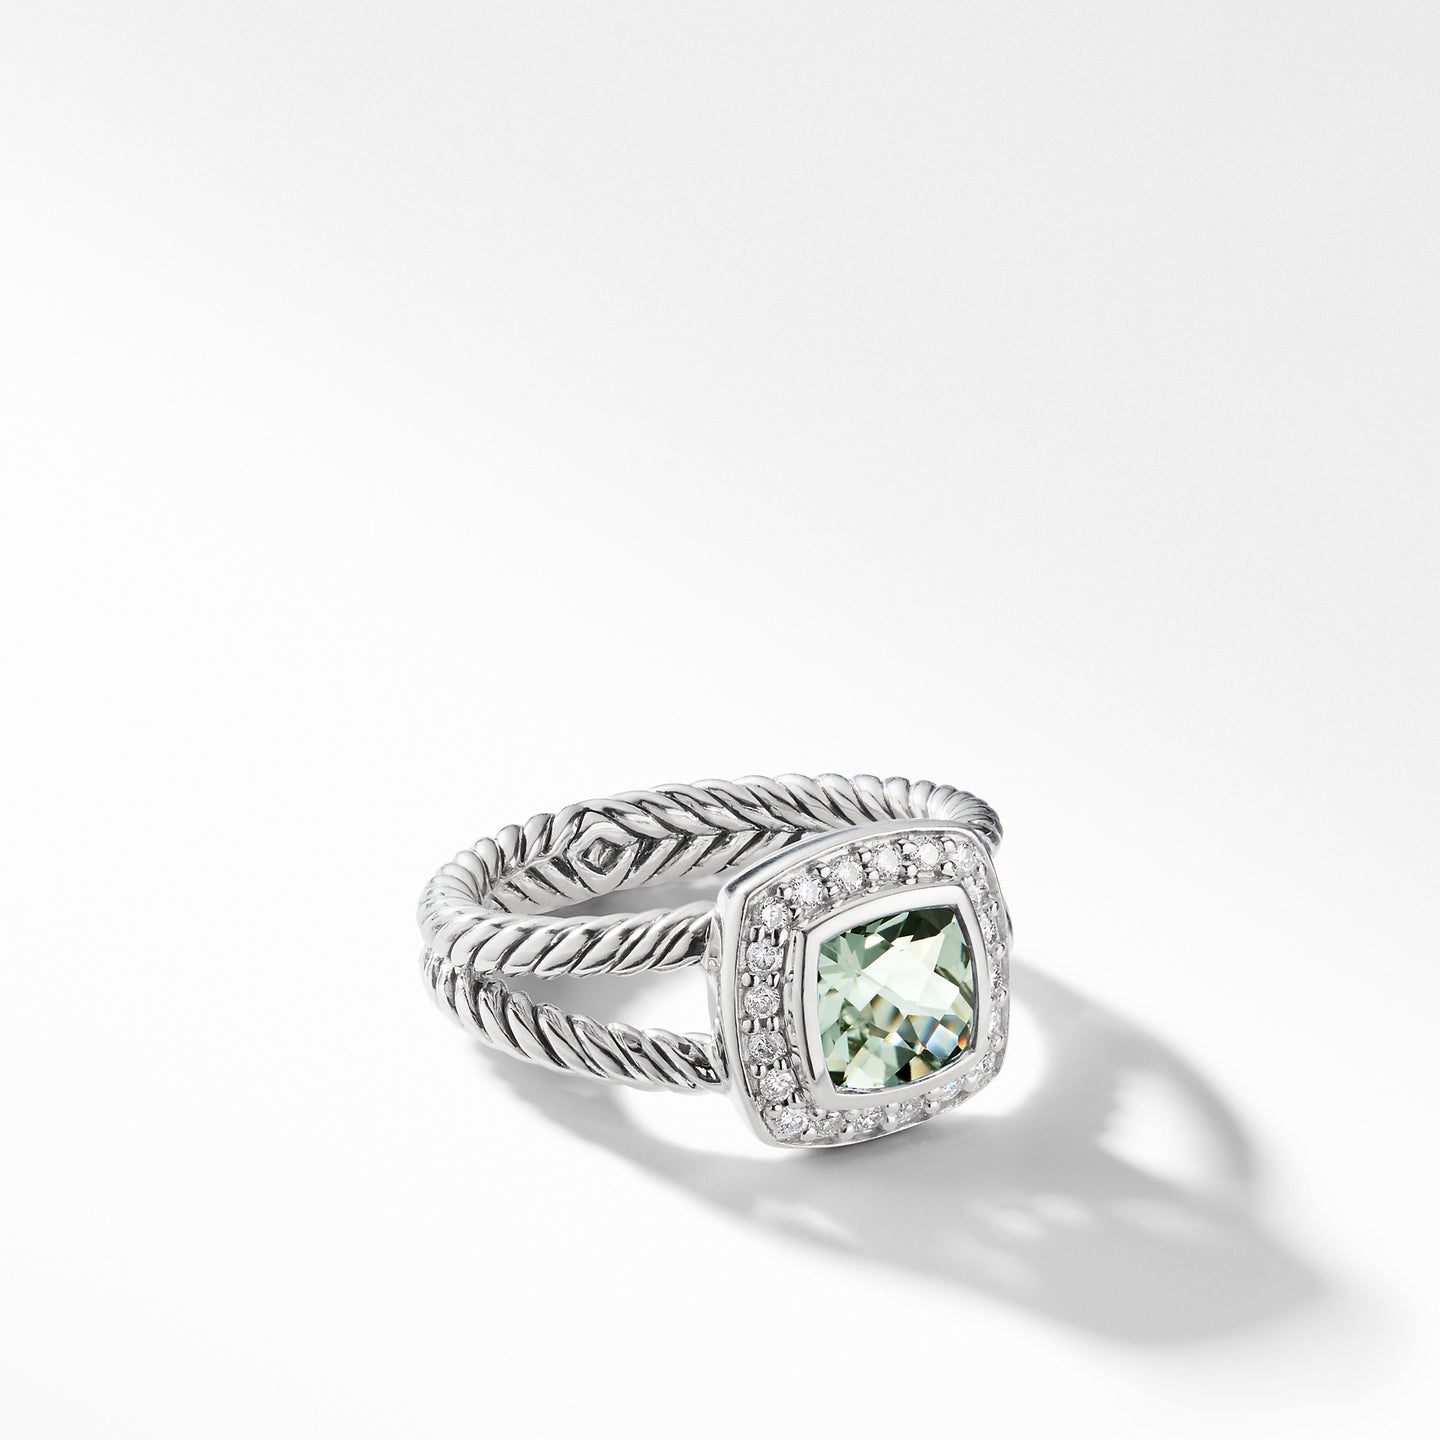 Petite Albion® Ring with Prasiolite and Diamonds, Size 7